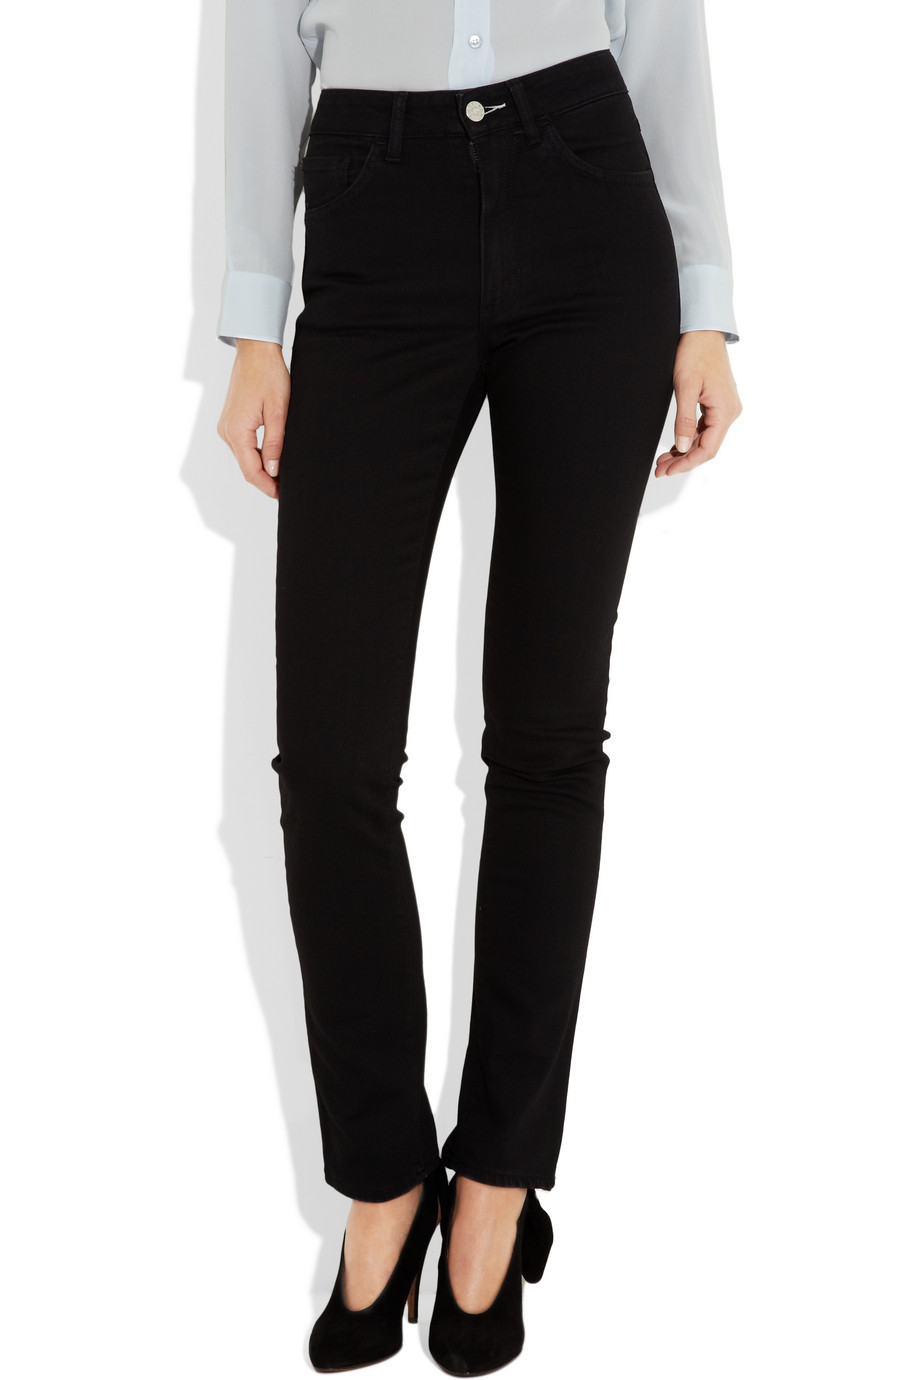 Acne Studios Needle High-rise Skinny Jeans in Black | Lyst Canada